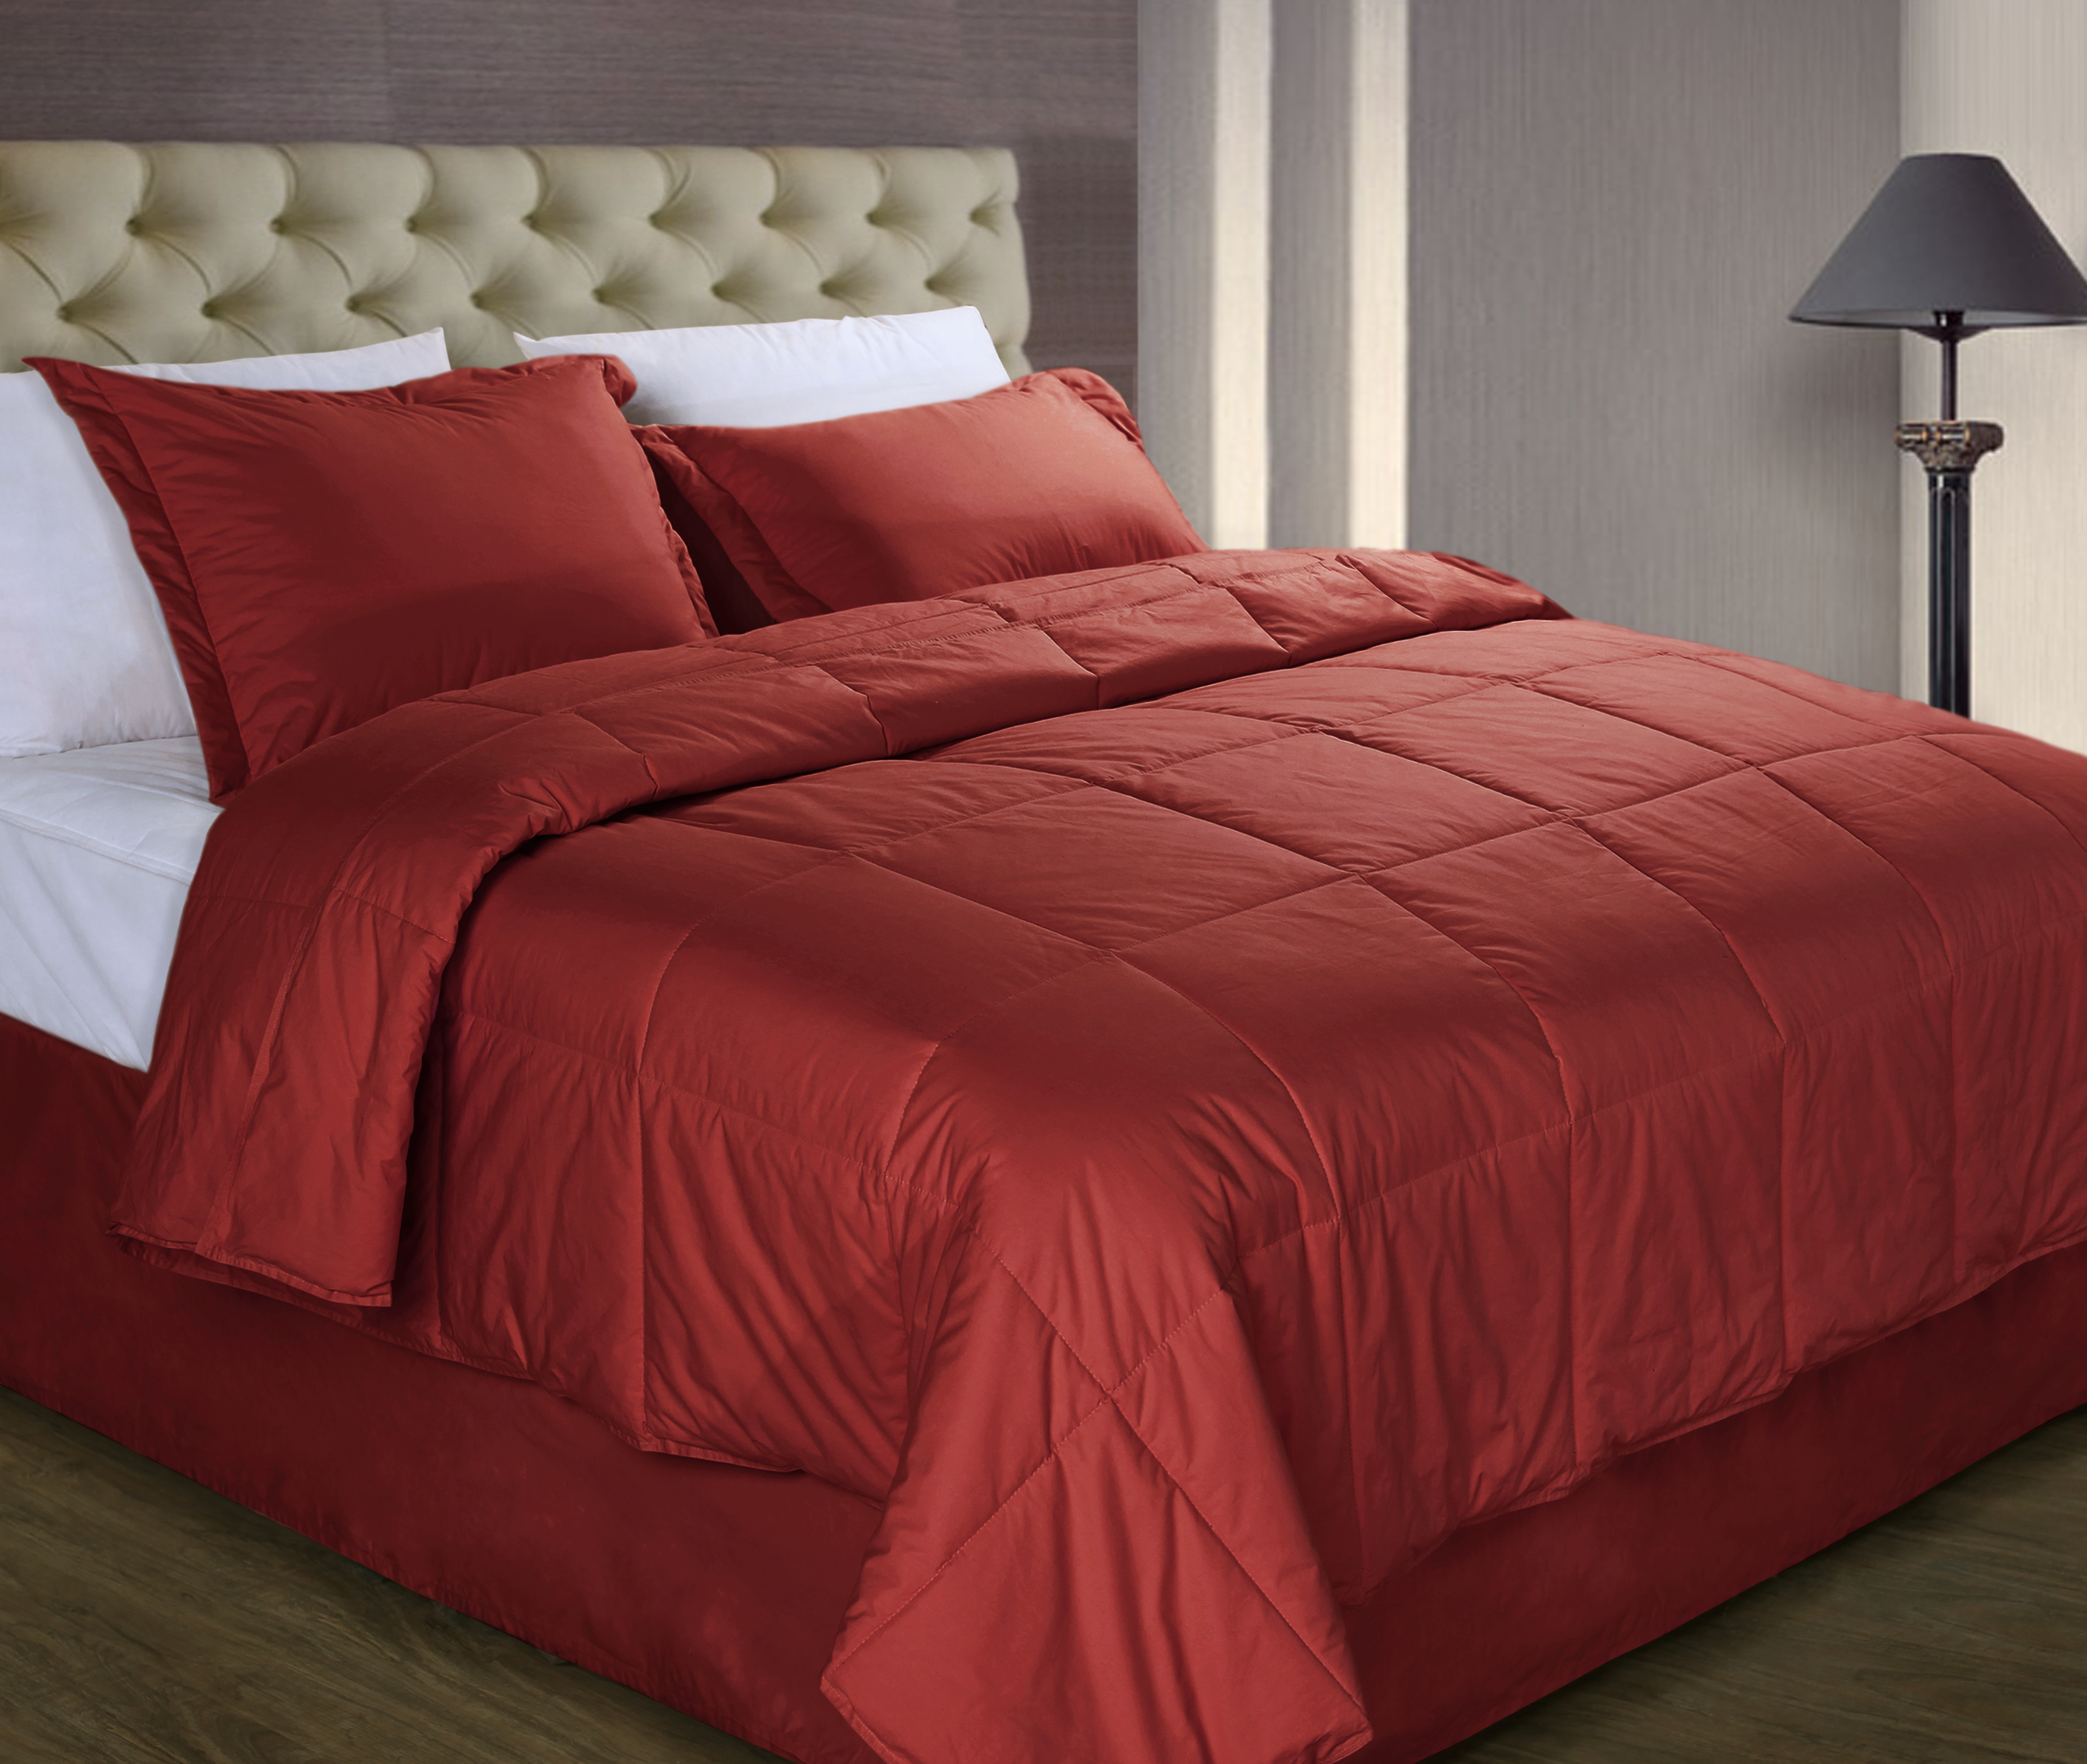 Cotton Loft  Soft and Medium Warmth All Natural Breathable Hypoallergenic Cotton Comforter